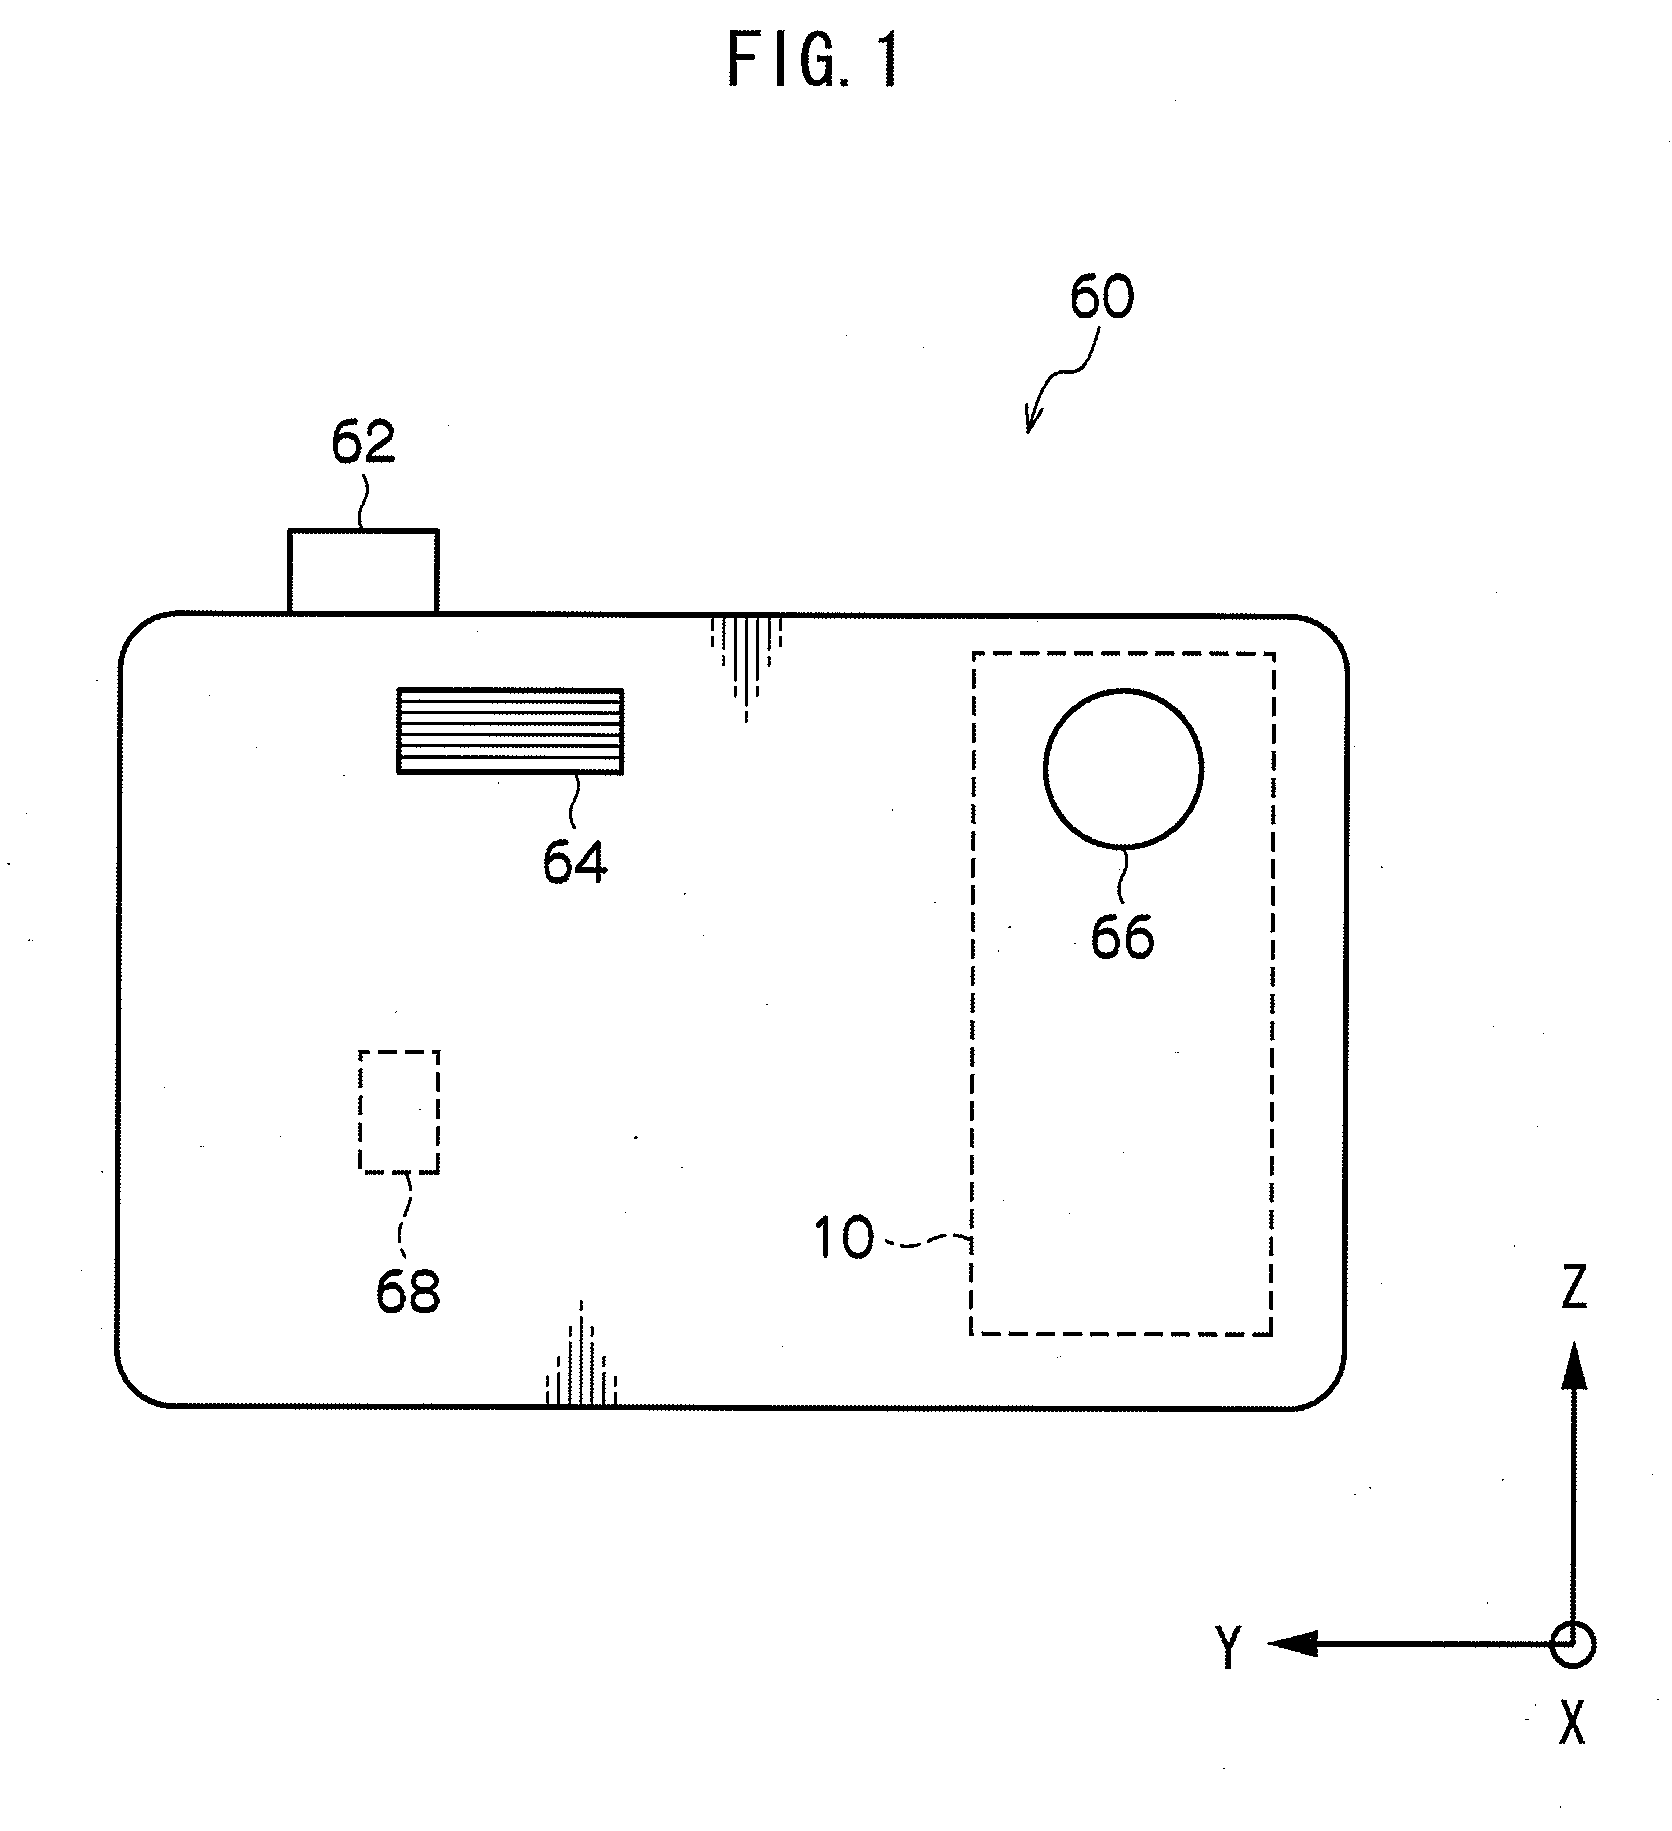 Focal point detection device and image capture device